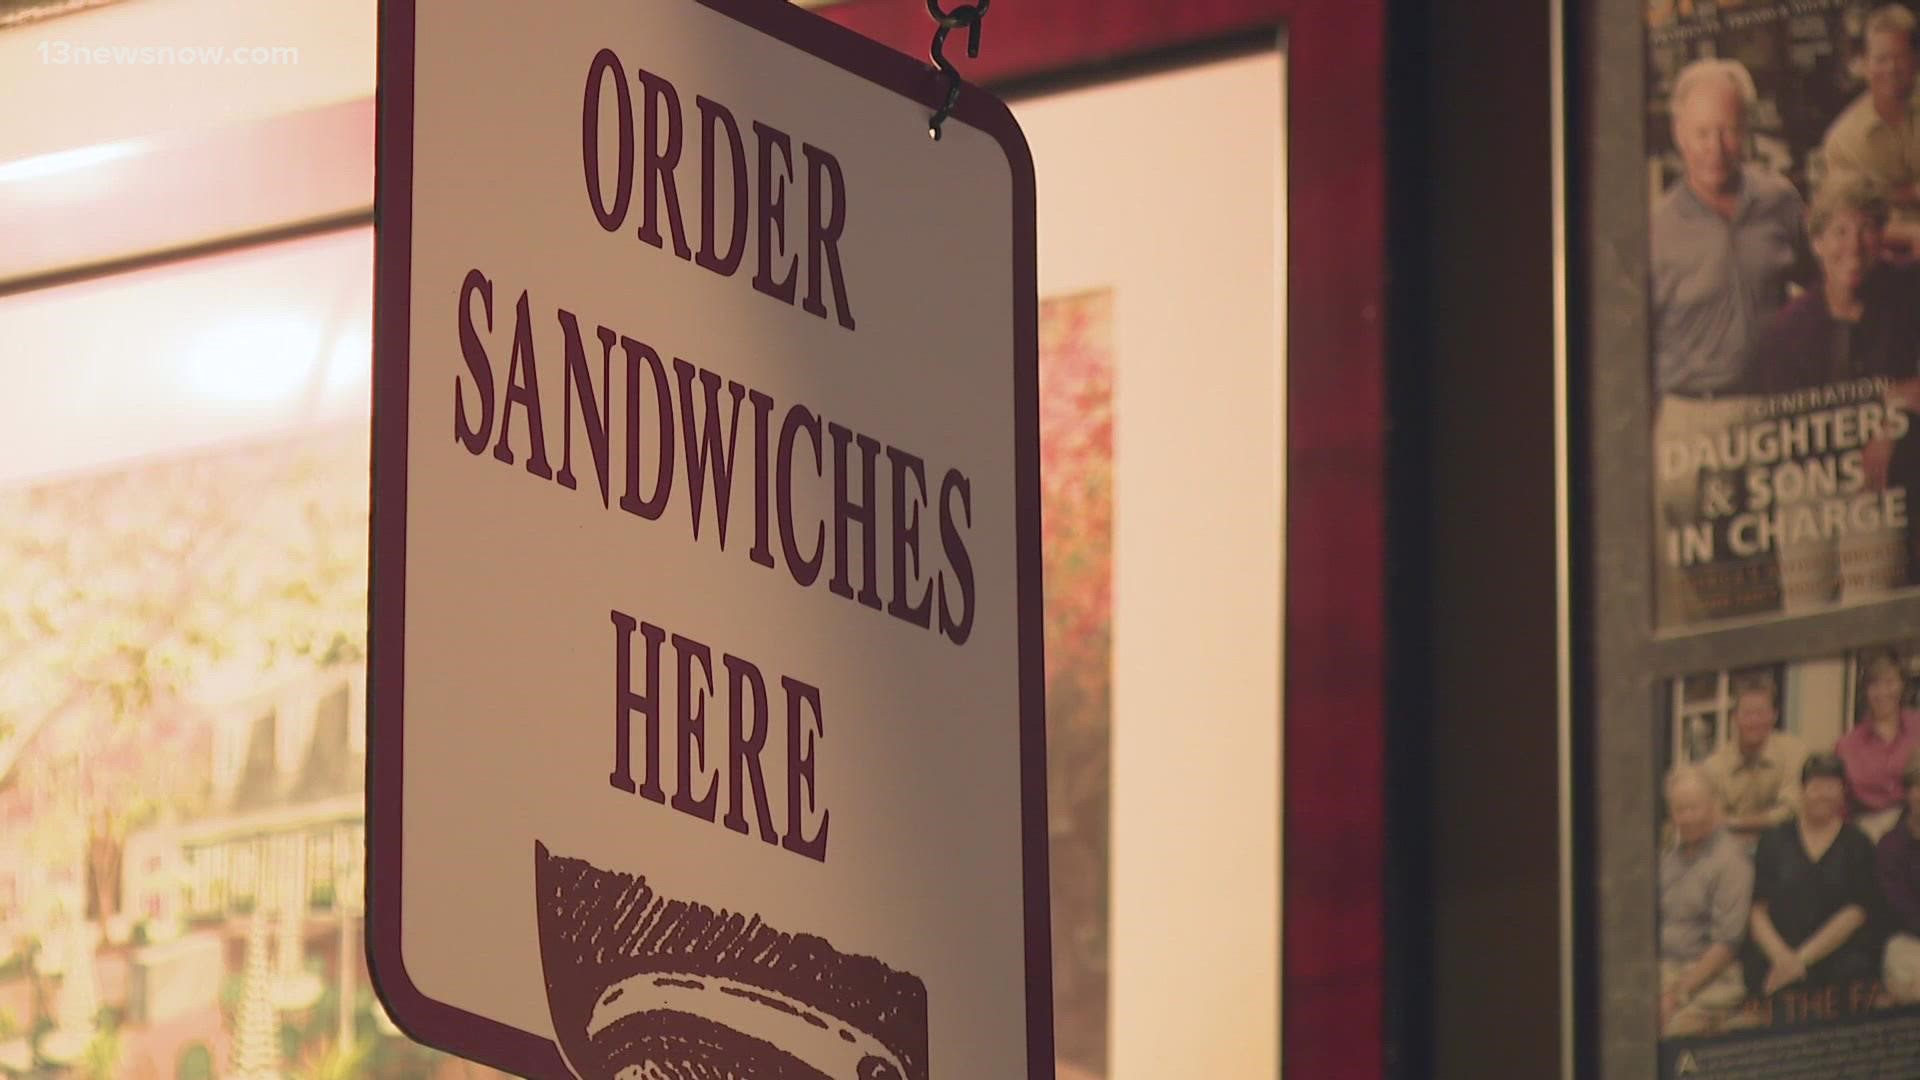 A Williamsburg business had to take sandwiches off the menu temporarily due to short staffing.